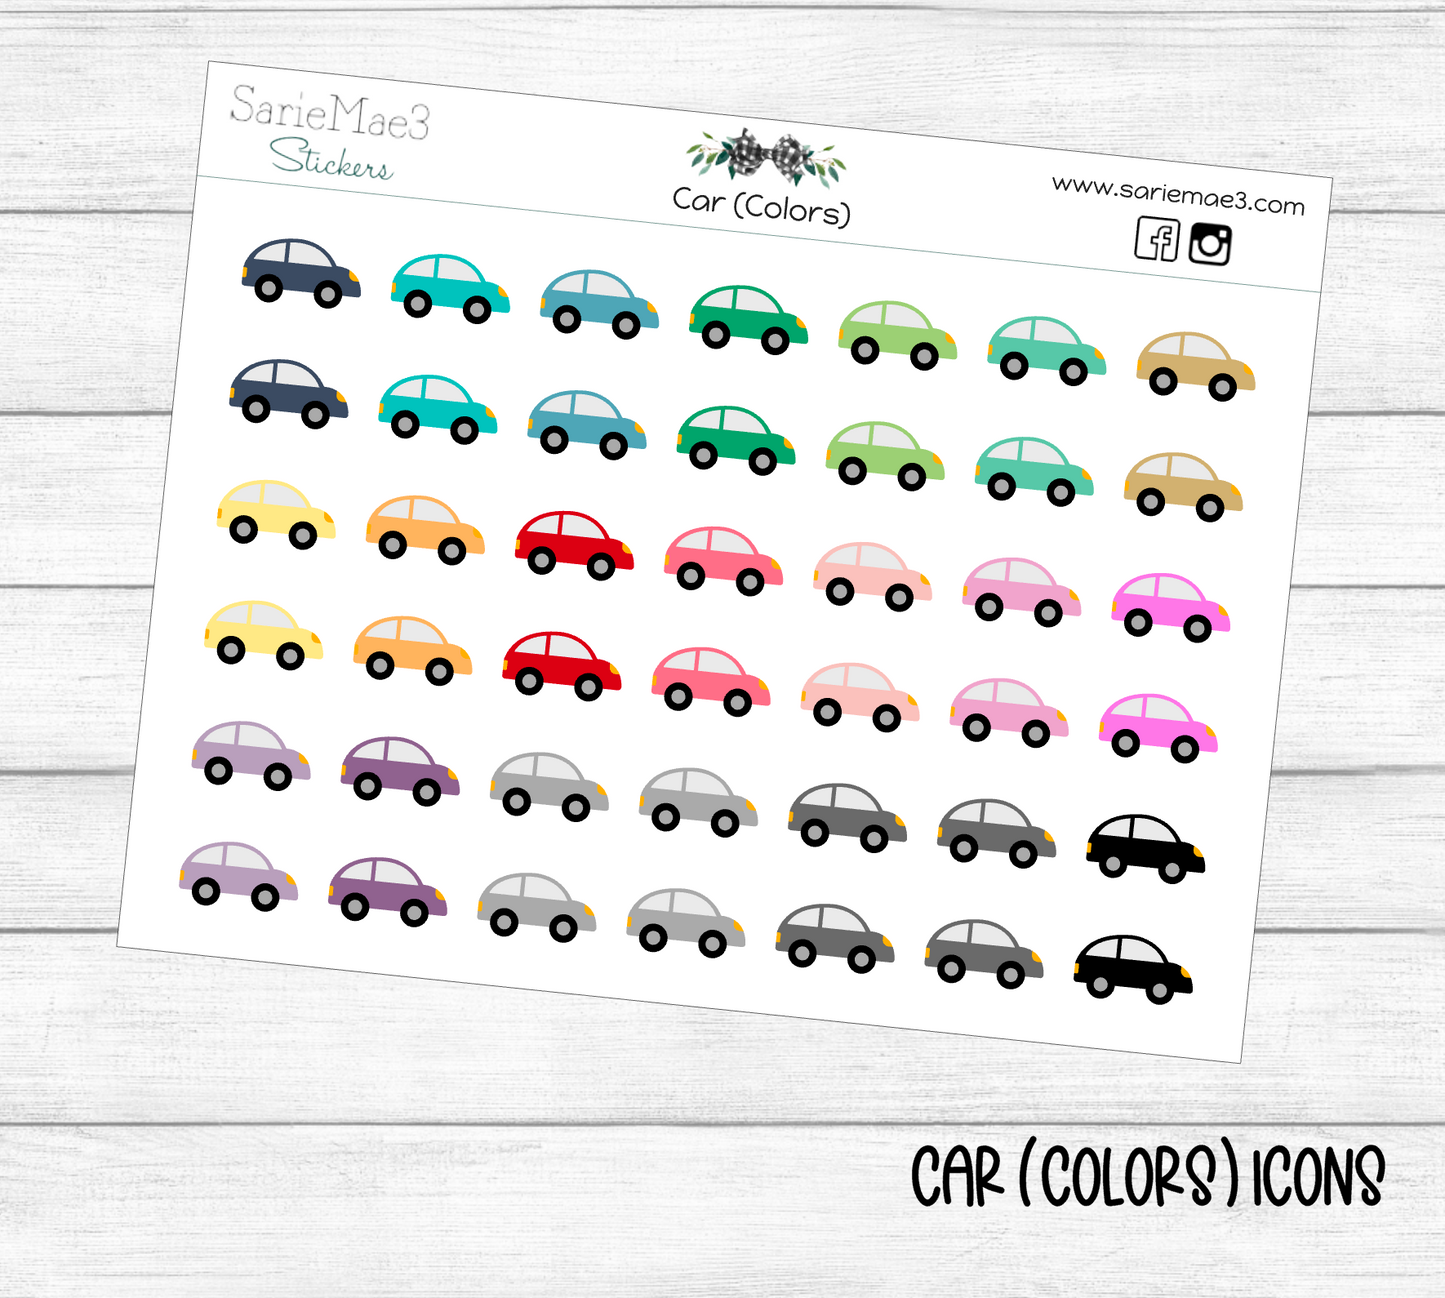 Car (Colors) Icons